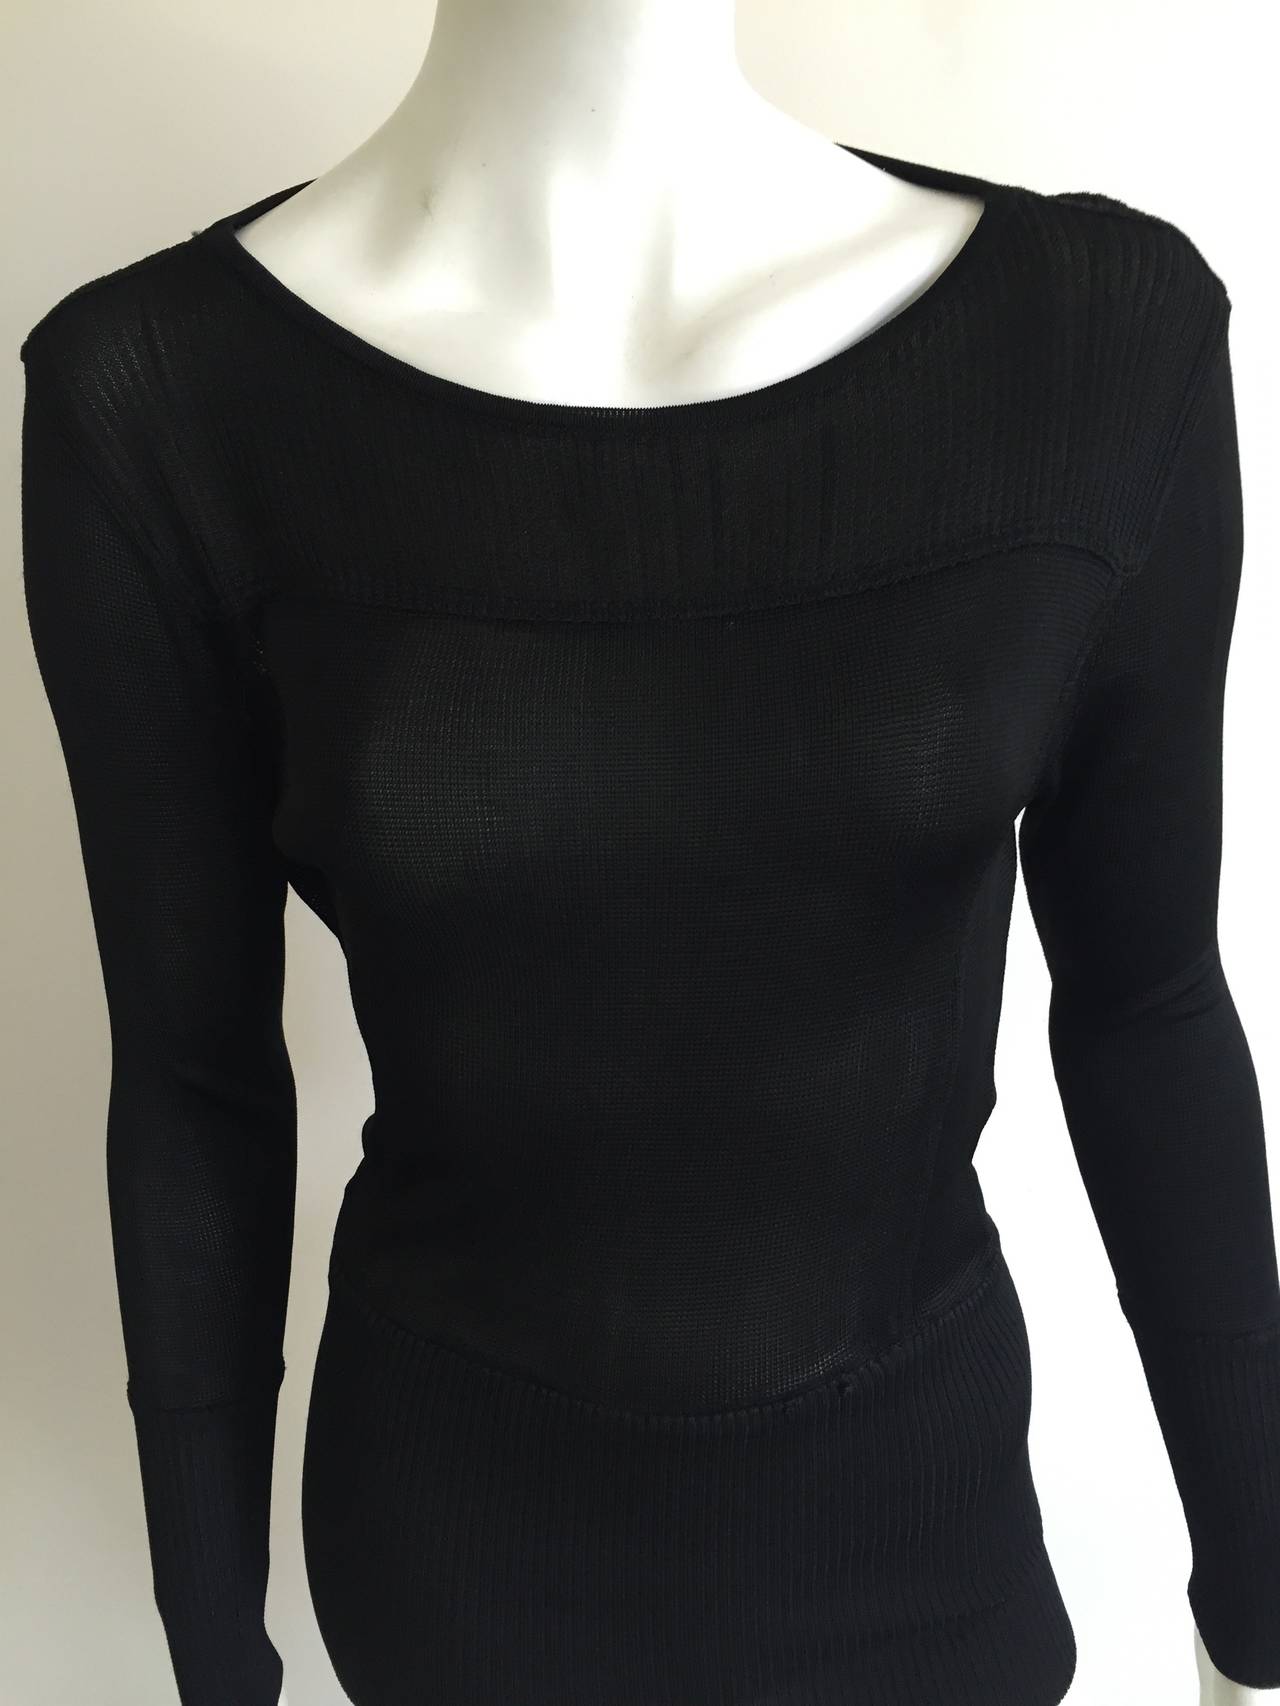 Claude Montana Knitwear 1980s black top will fit a size 4 / 6 ( Please see & use measurements to properly measure your body). This piece was purchased from a high end Atlanta store and never wore the piece. The sheer fabric and cut out back make